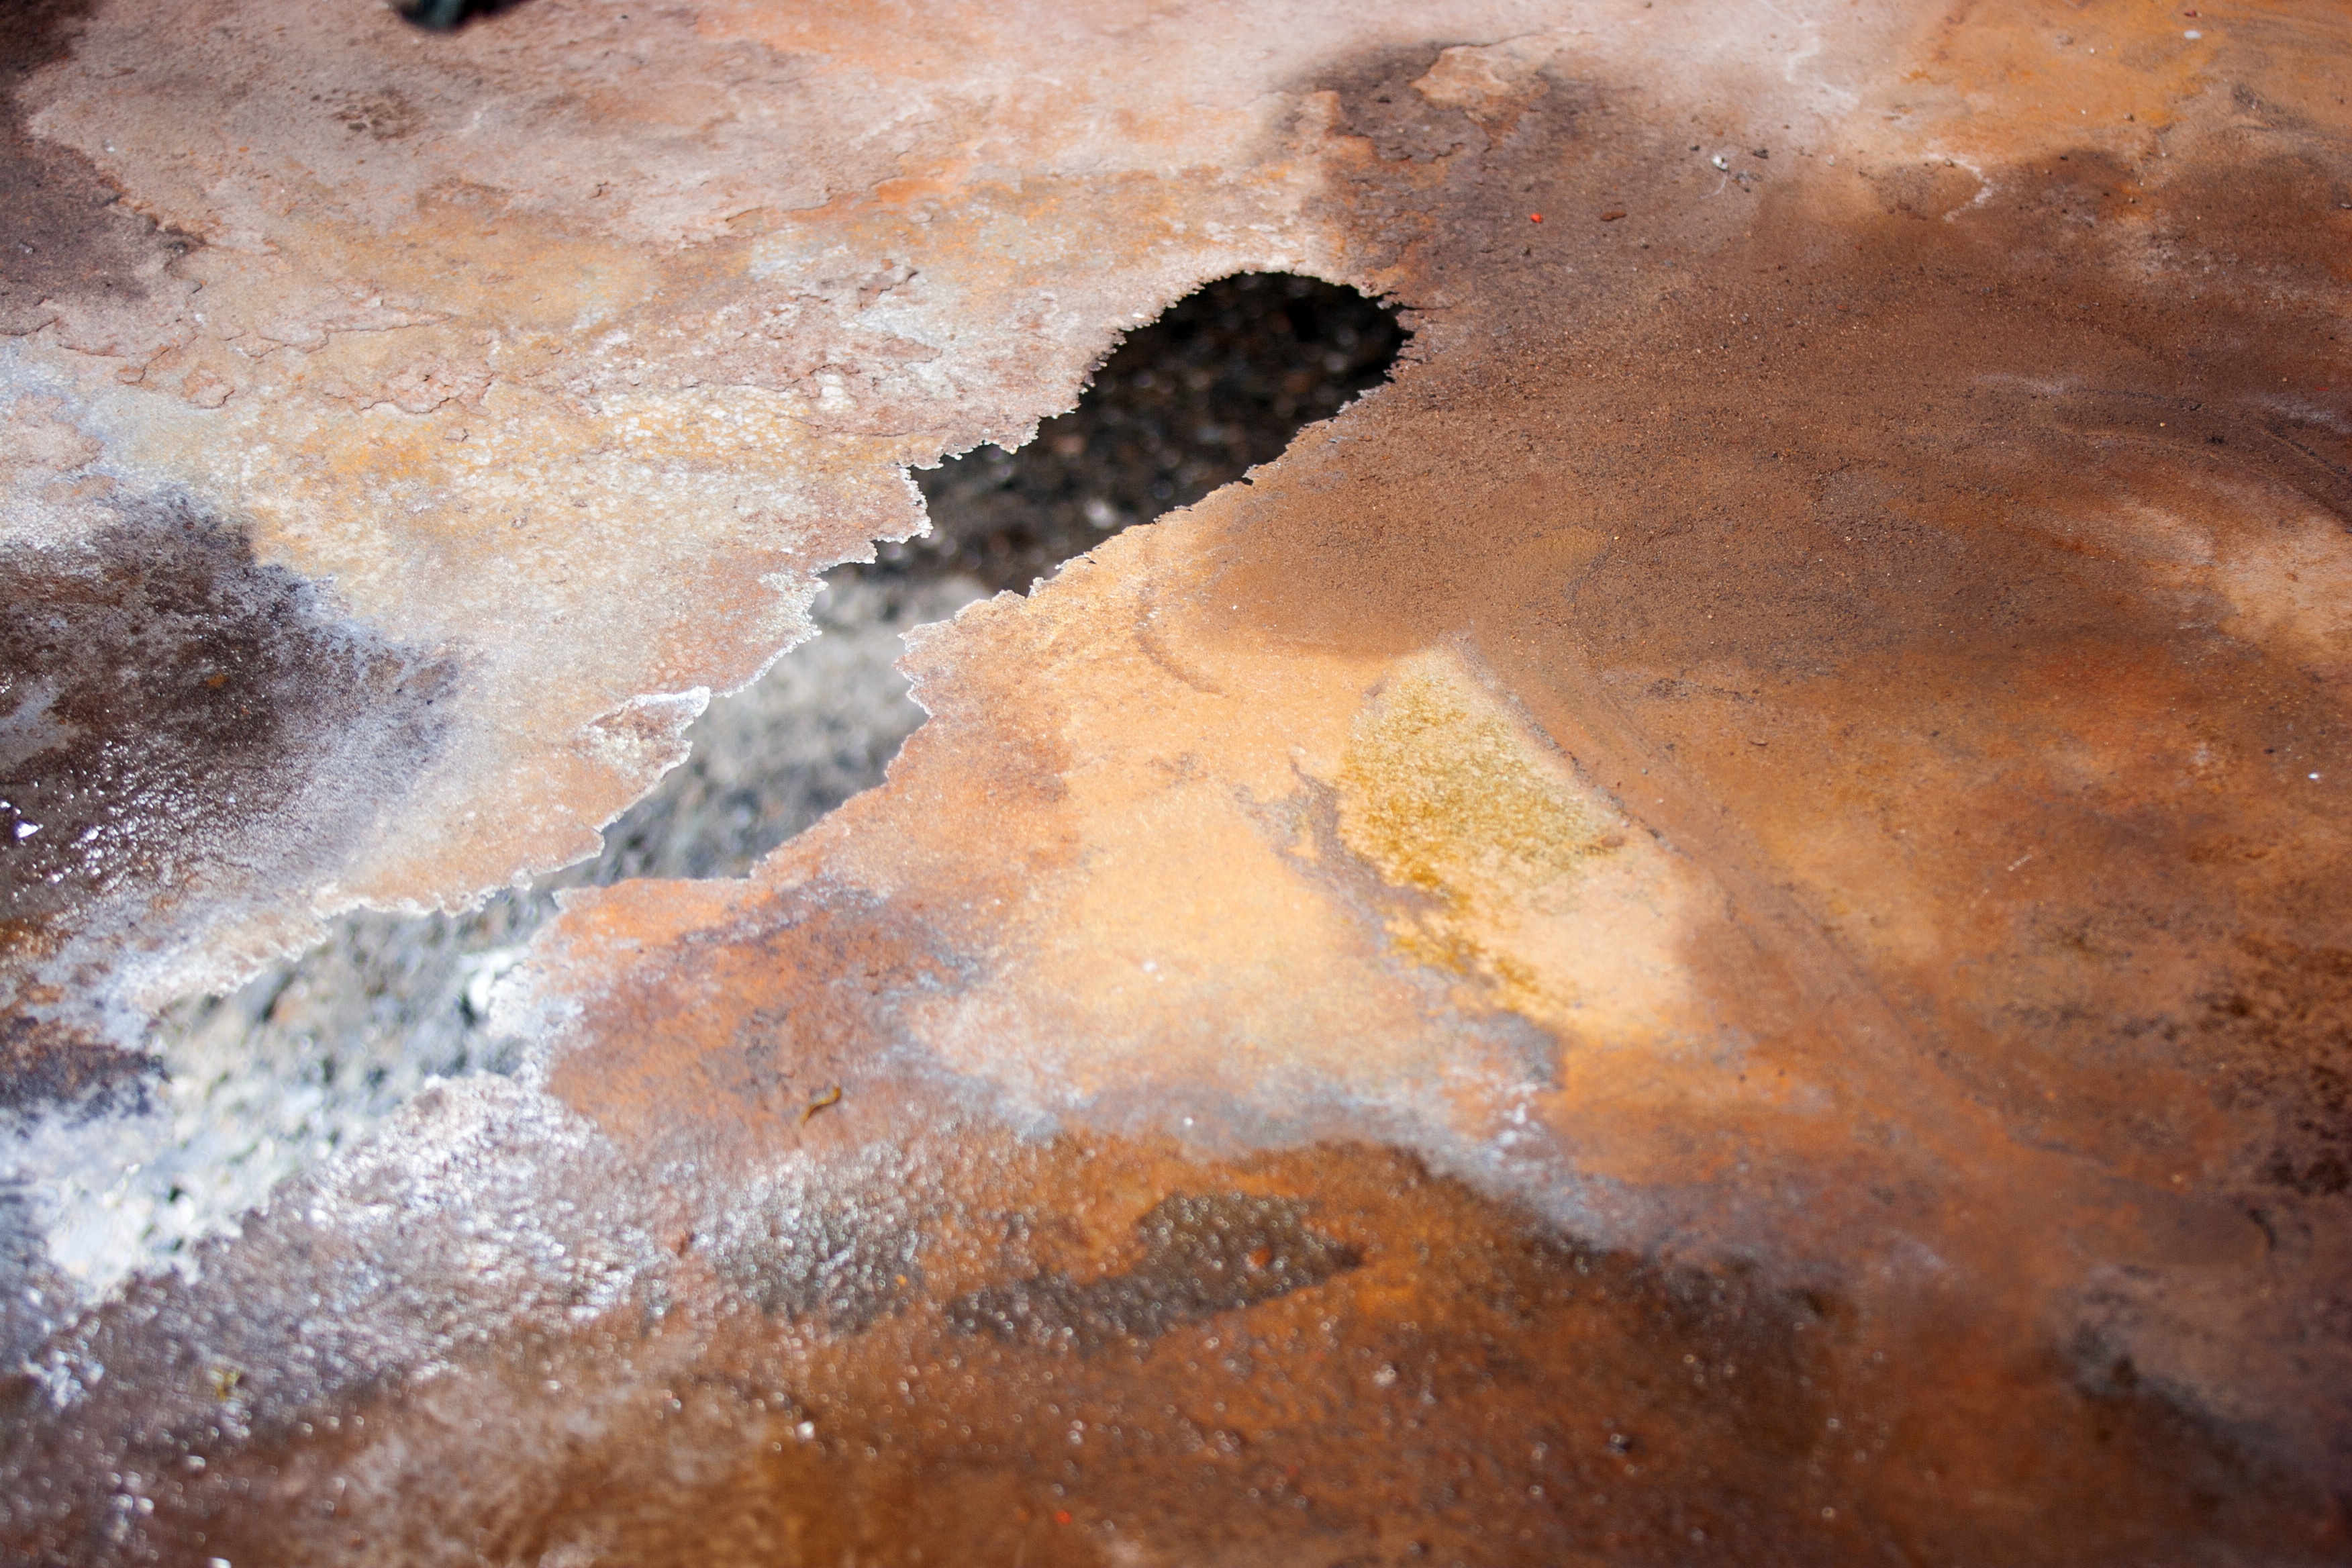 A steel surface which appears to be corrosive and covered in clear oil and grease